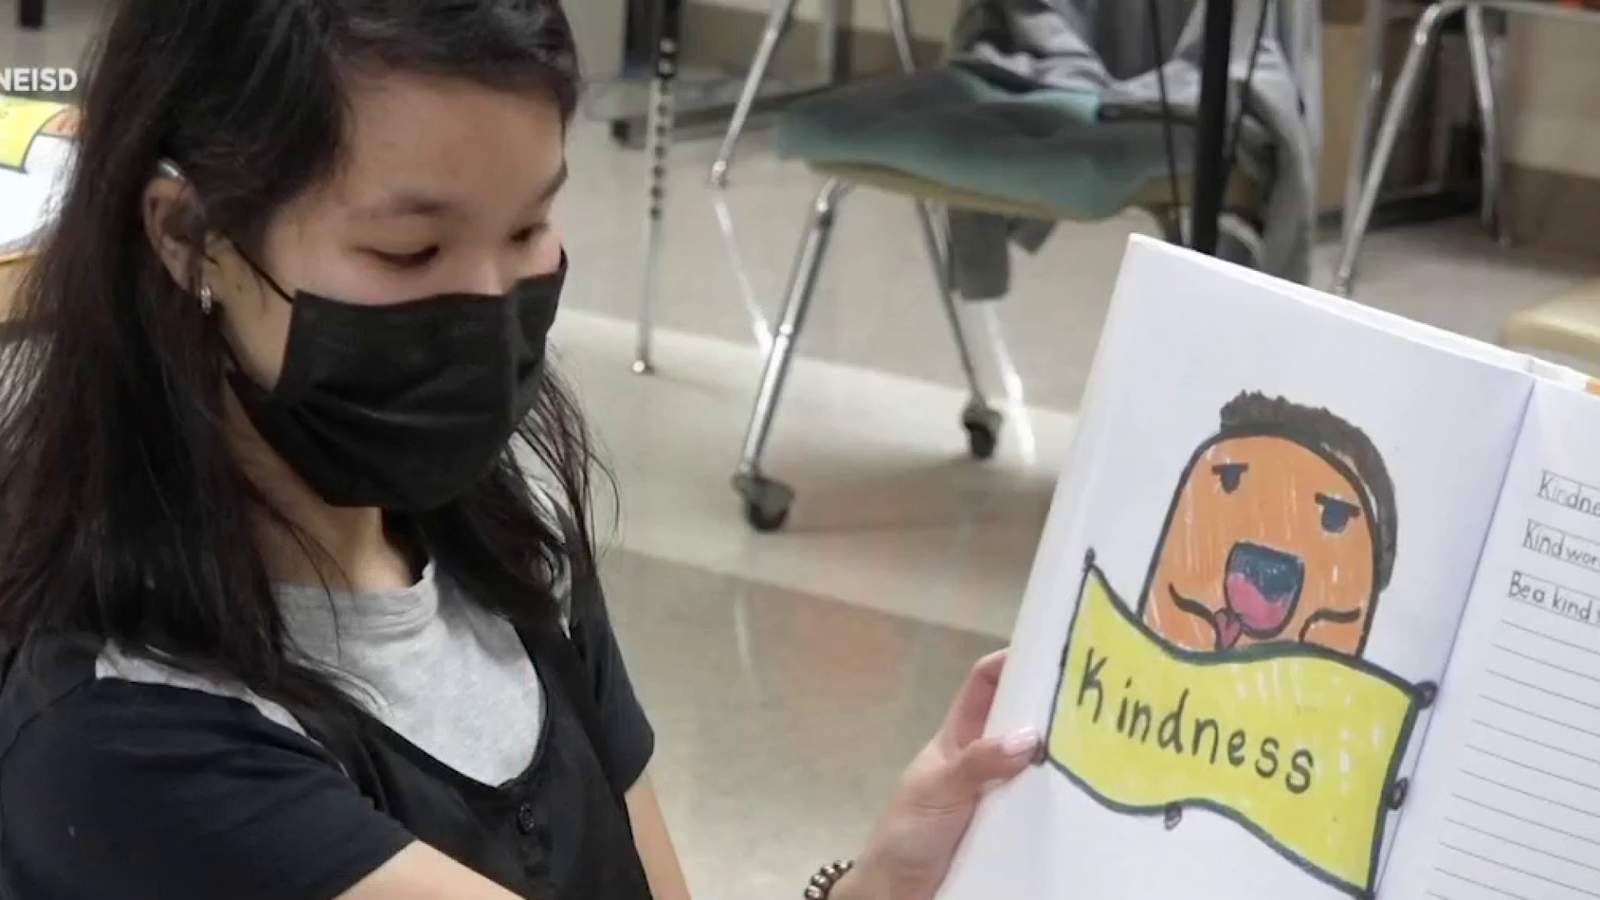 NEISD students publish book about kindness